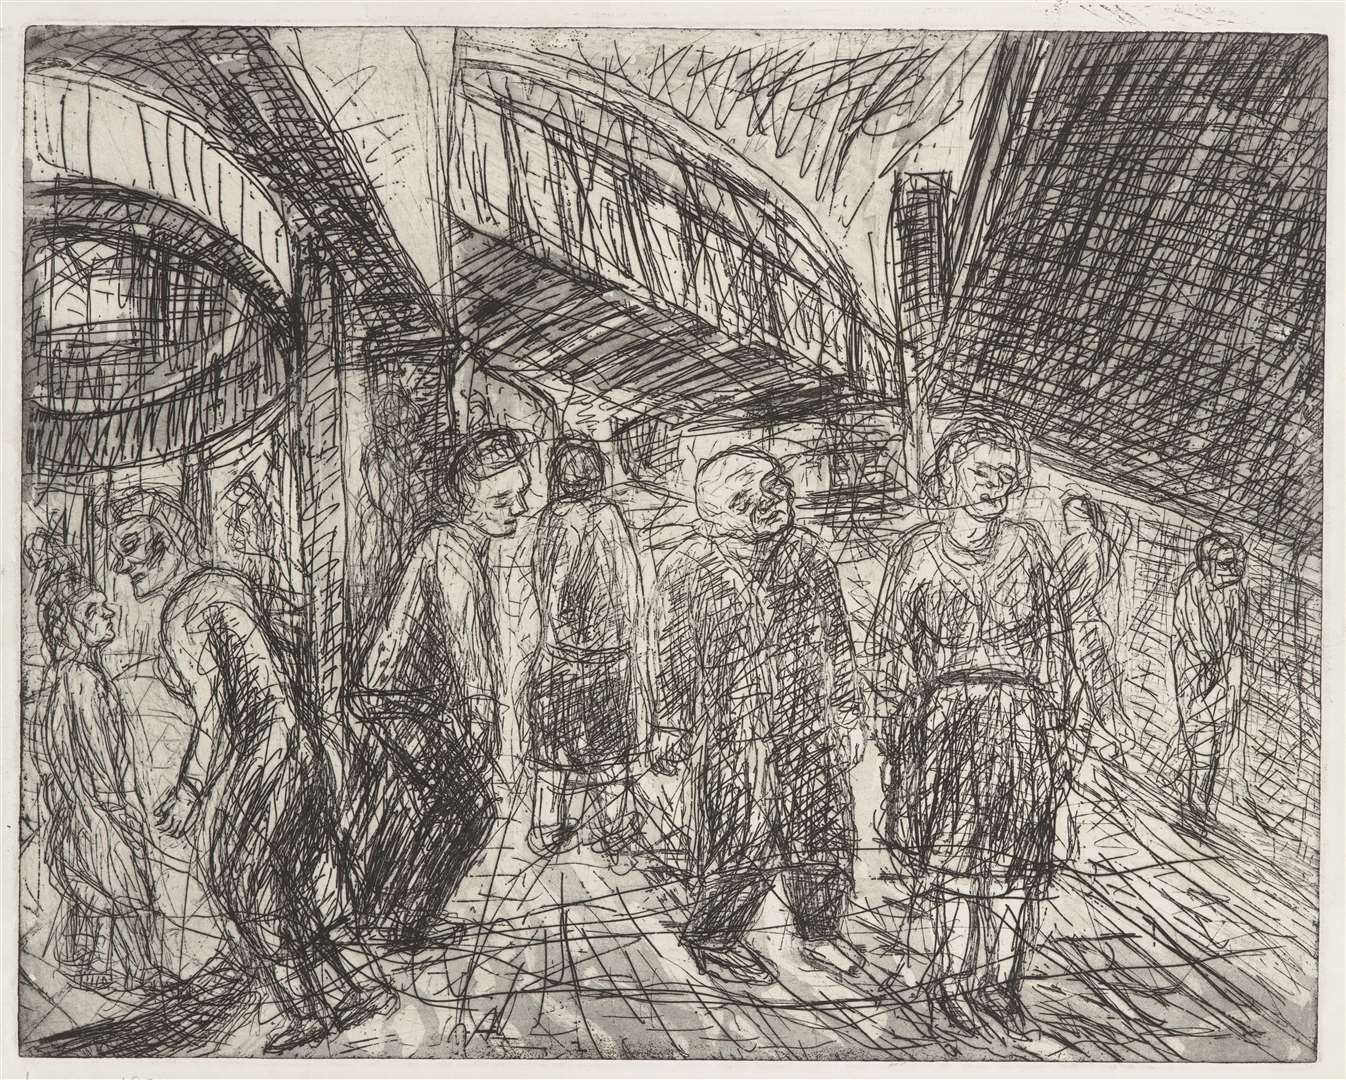 Leon Kossoff, Outside Kilburn Underground sixth state 1981. On show in The Printed Line